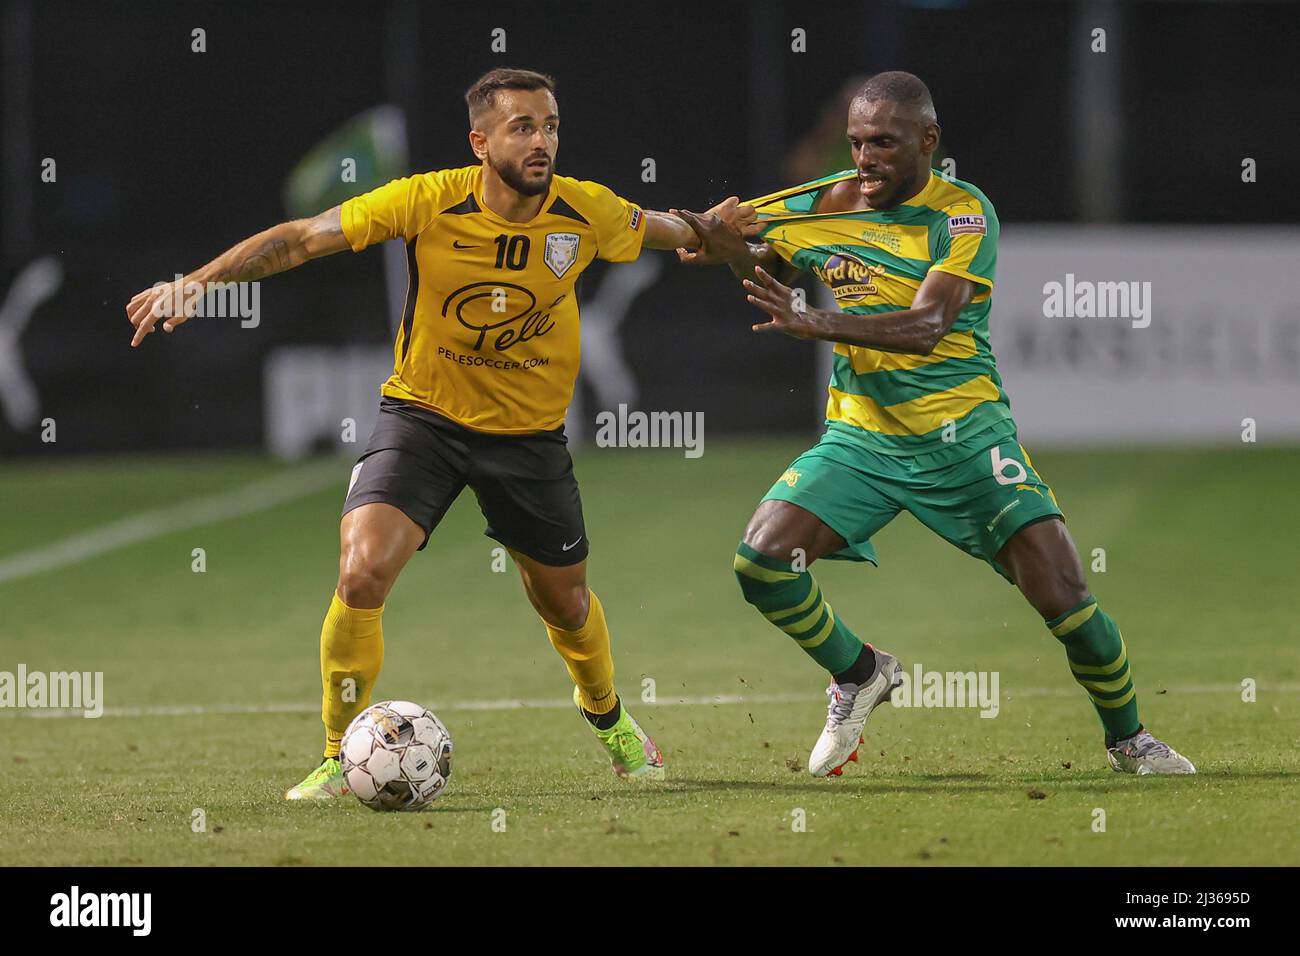 St. Petersburg, FL USA: The Villages SC midfielder Daniel Farias (10) tries to tackle and steal the ball by grabbing the shirt of Tampa Bay Rowdies mi Stock Photo